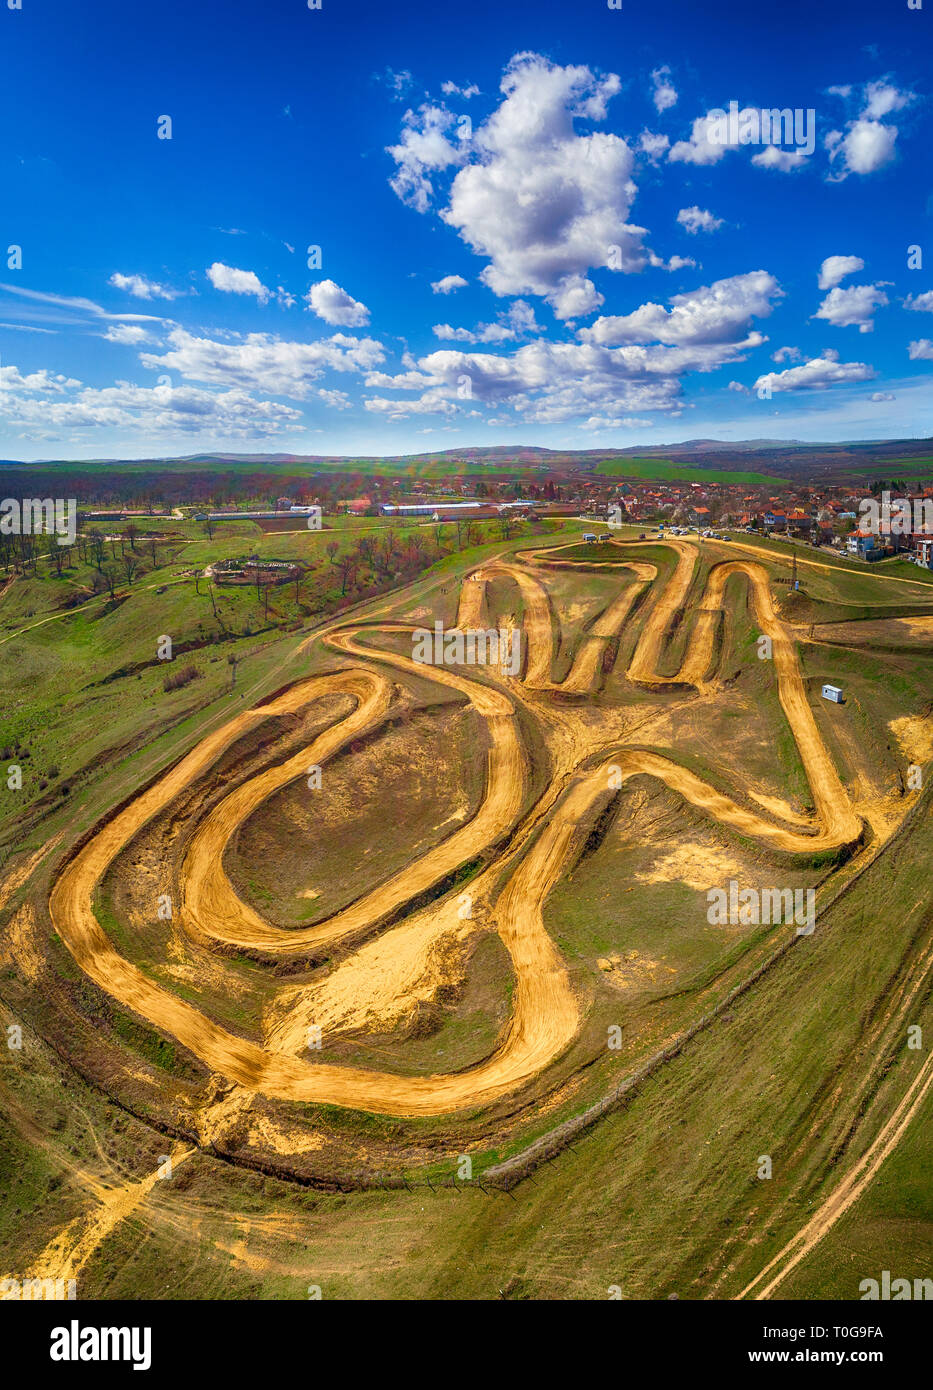 Aerial top down photo of motocross track showing the high-performance off-road motorcycles racing on the enclosed manmade dirt circuit with steep jump Stock Photo